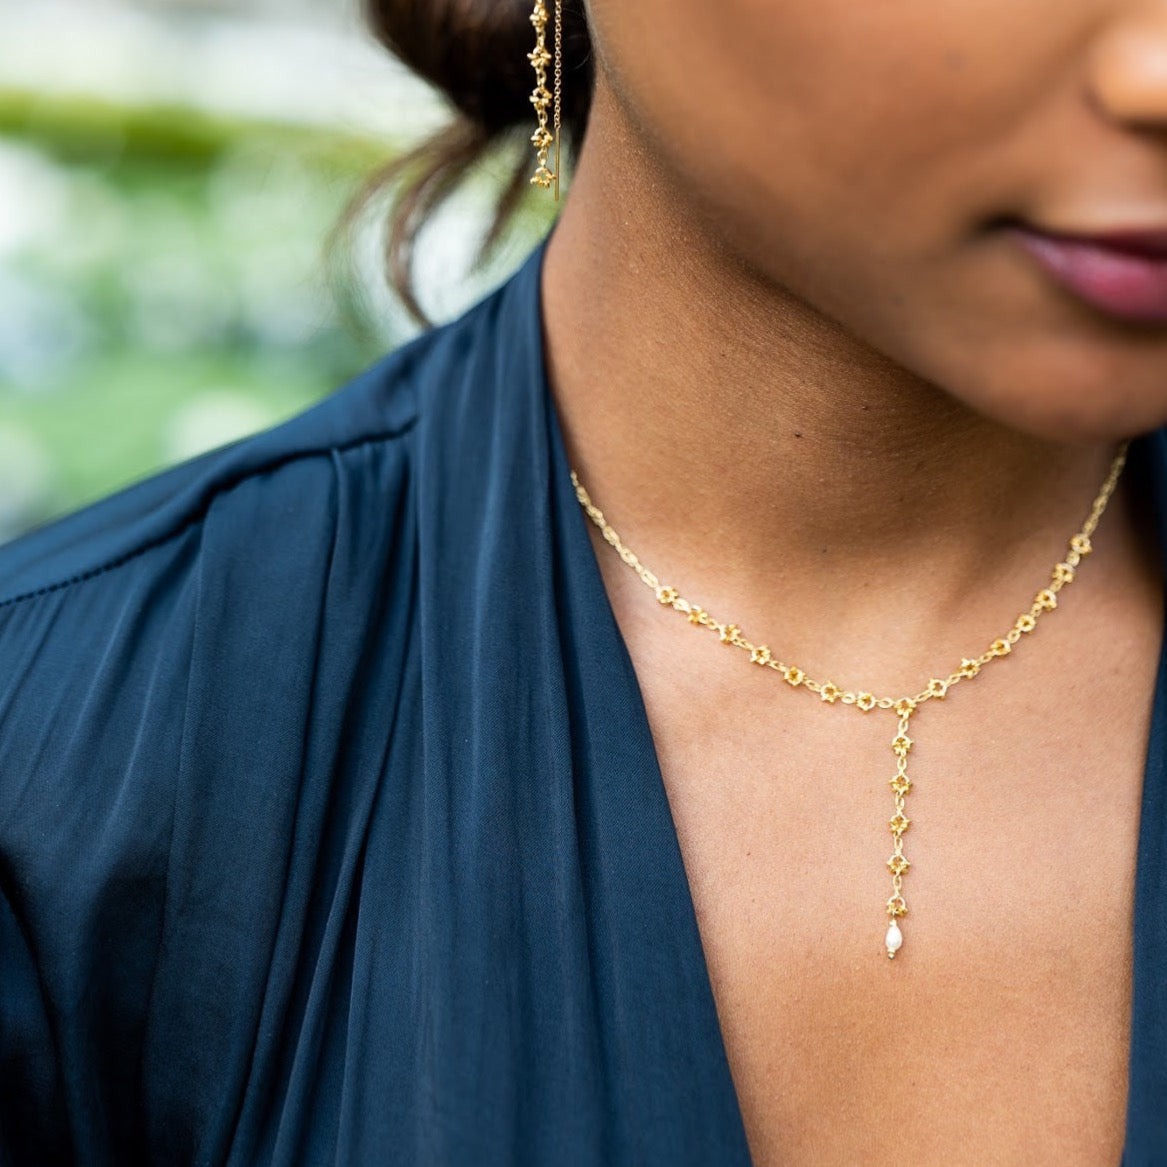 Sharon Pearl Lariat Necklace